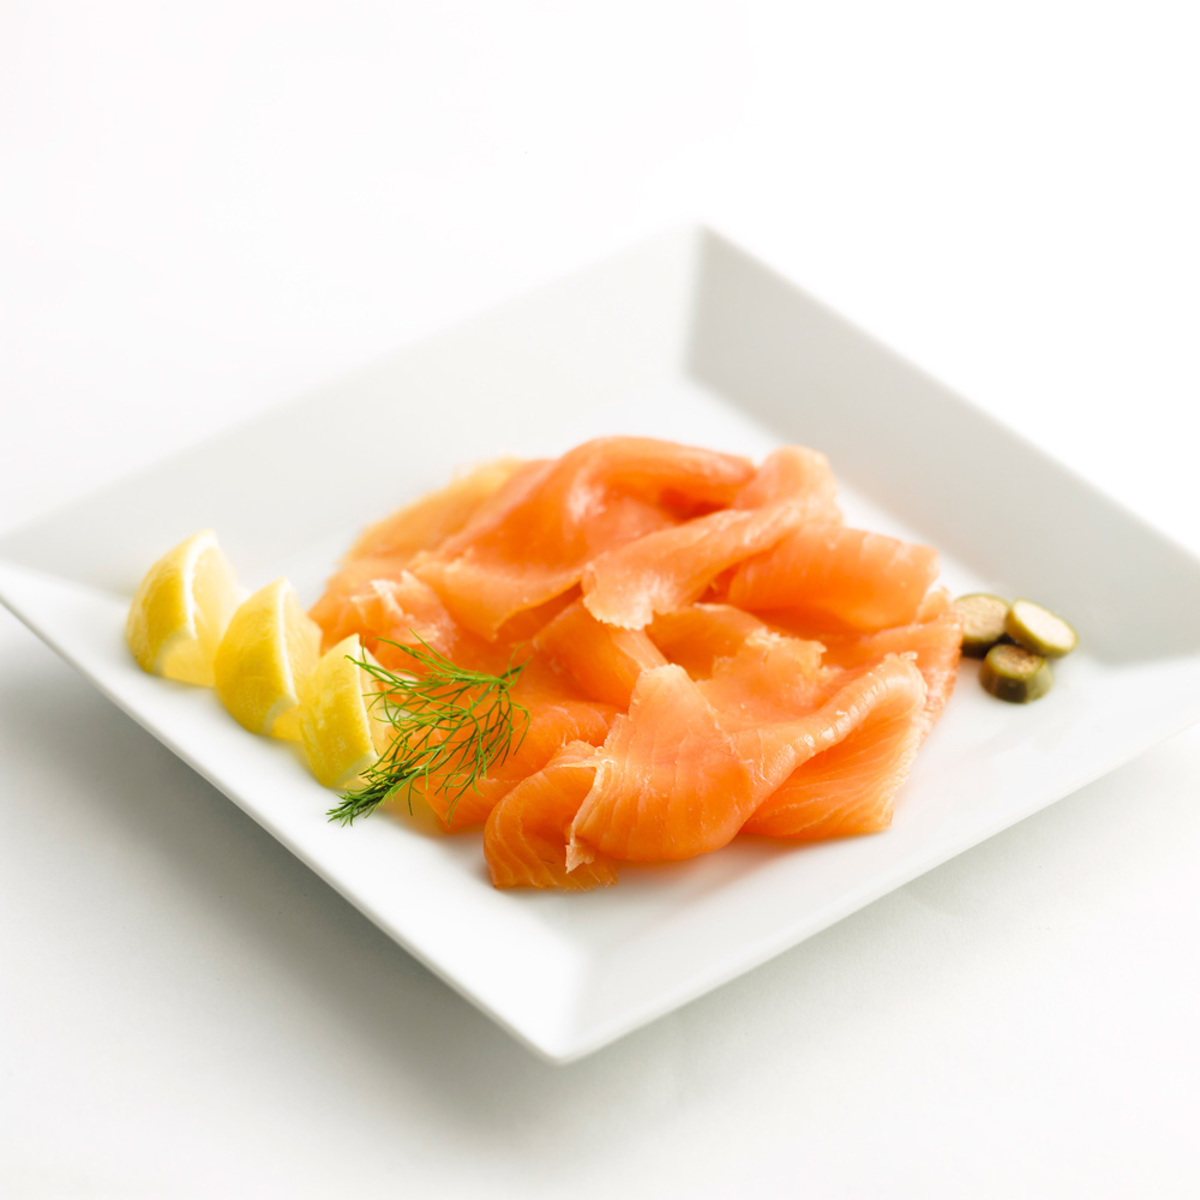 Coln Valley Traditionally Smoked Salmon D Cut, 2 x 500g (Serves 8-10 people)